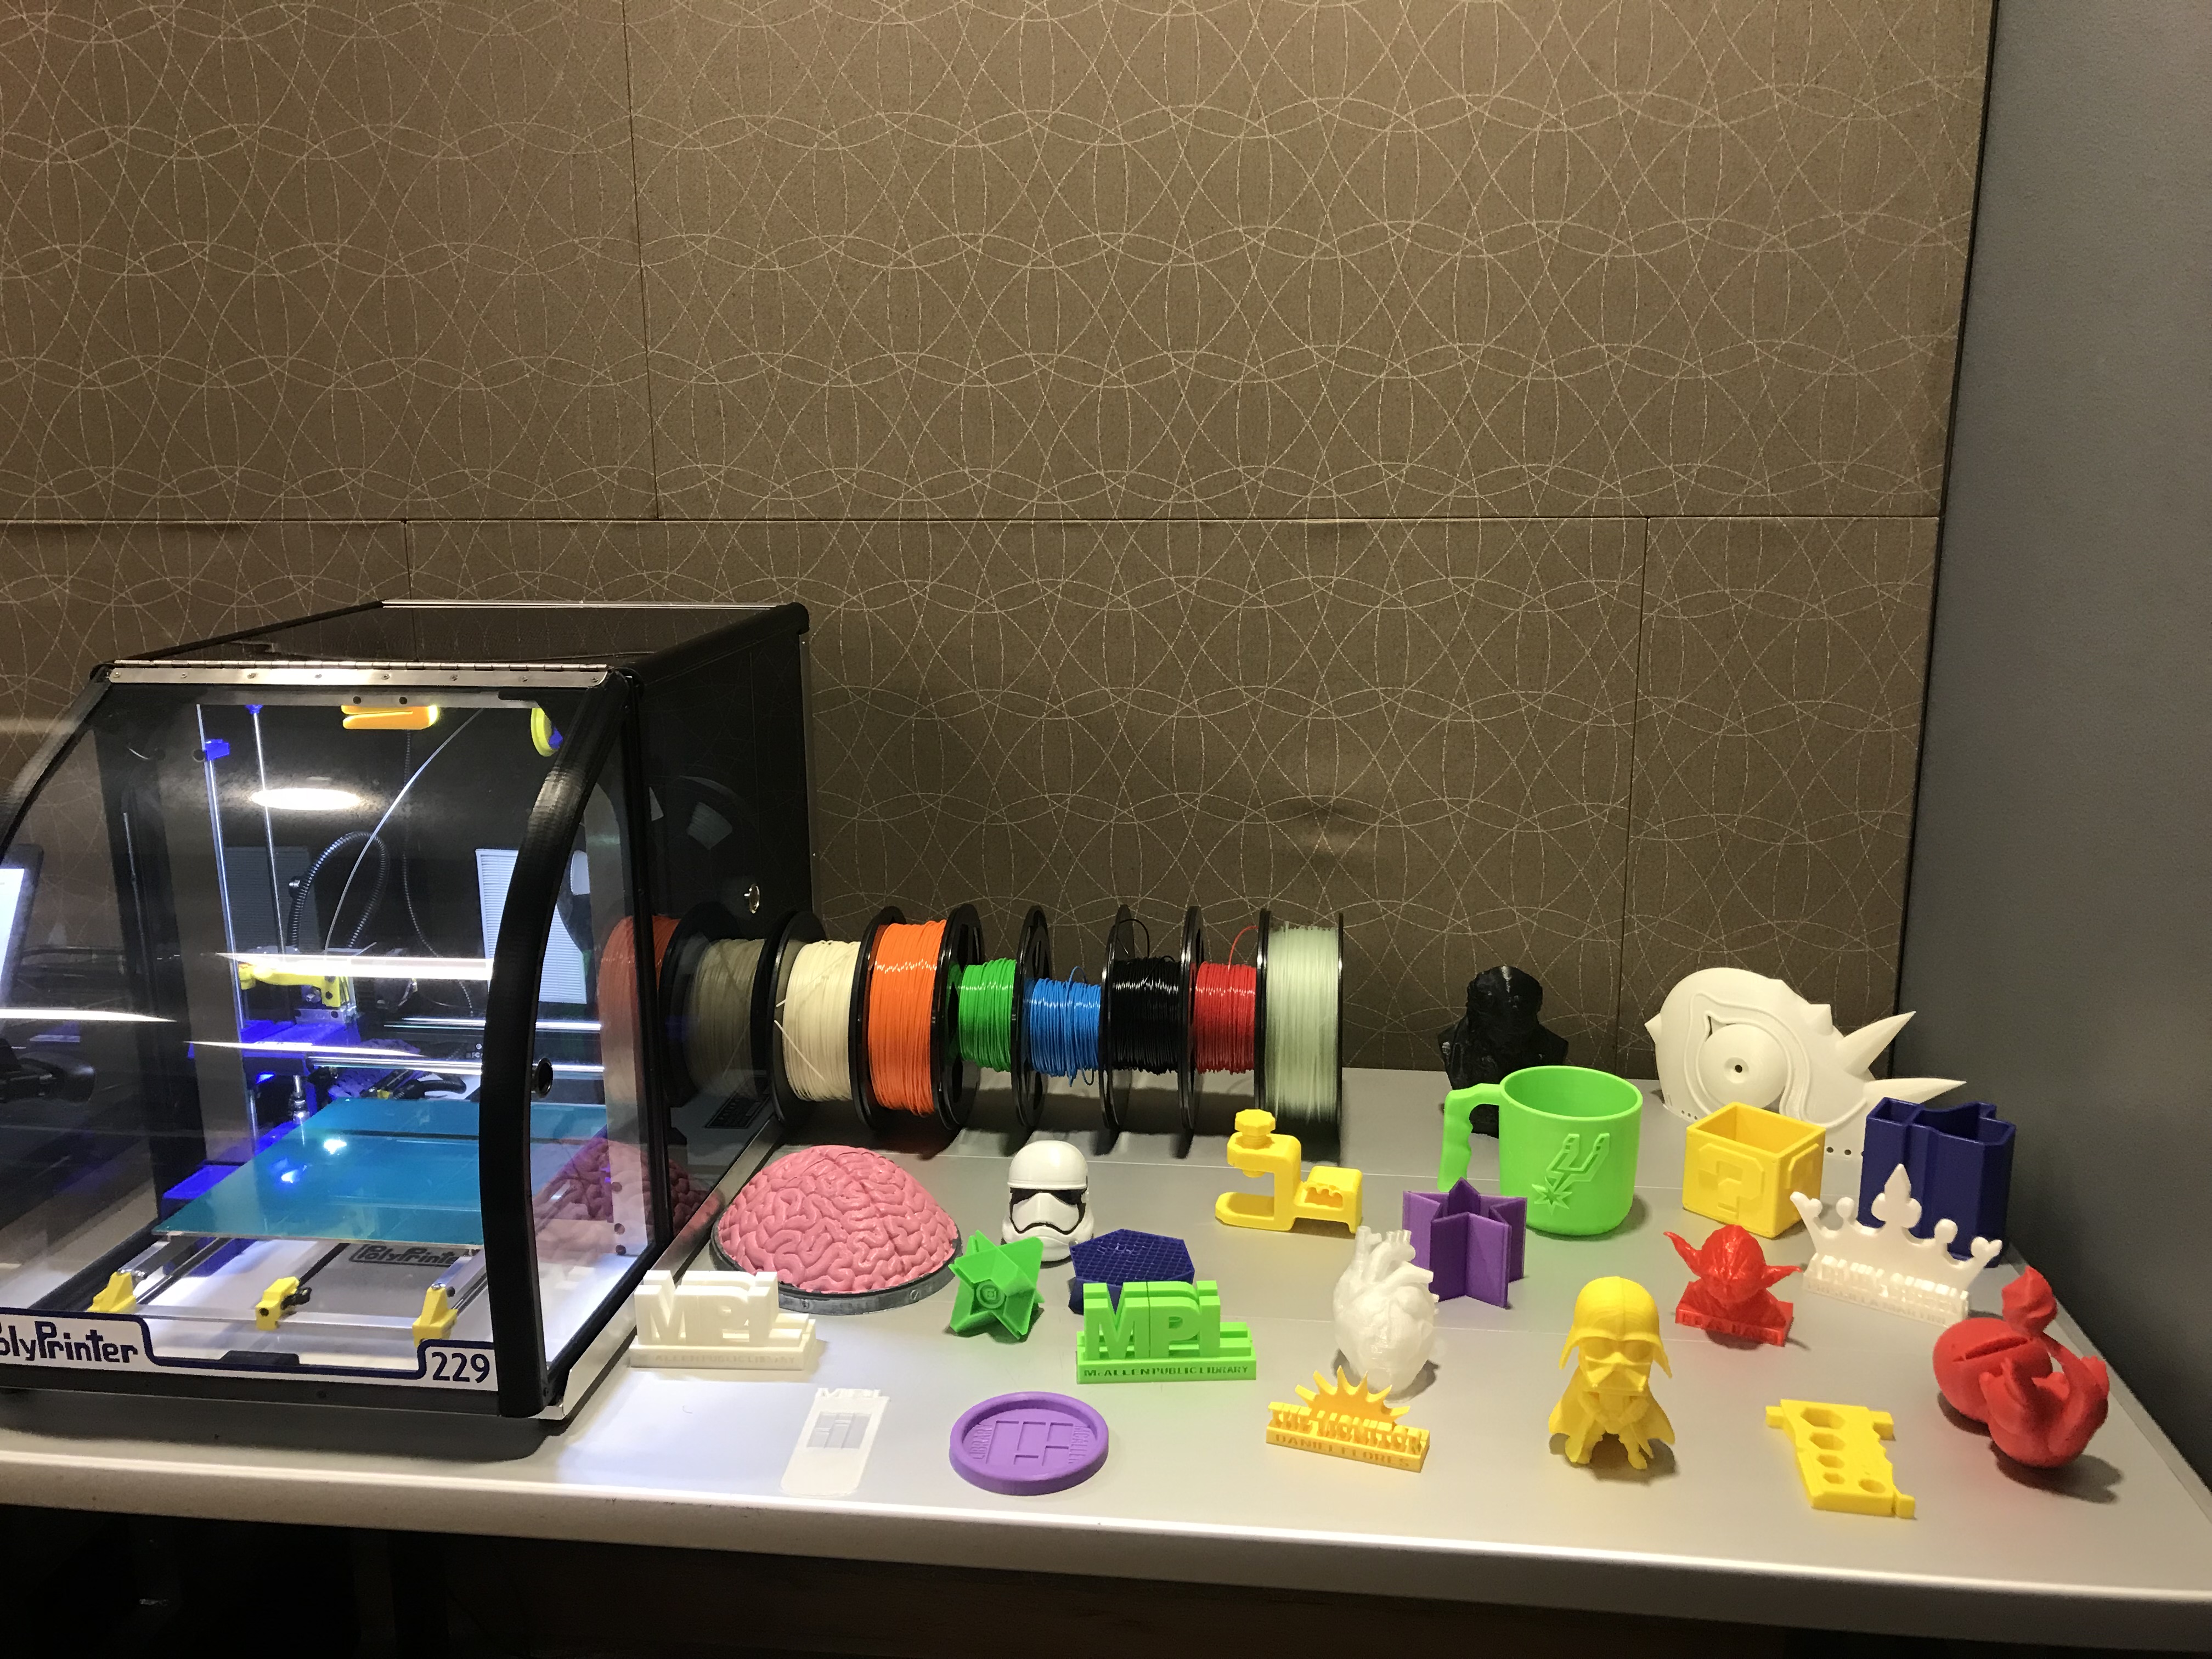 Image of 3D printer with objects that have been printed